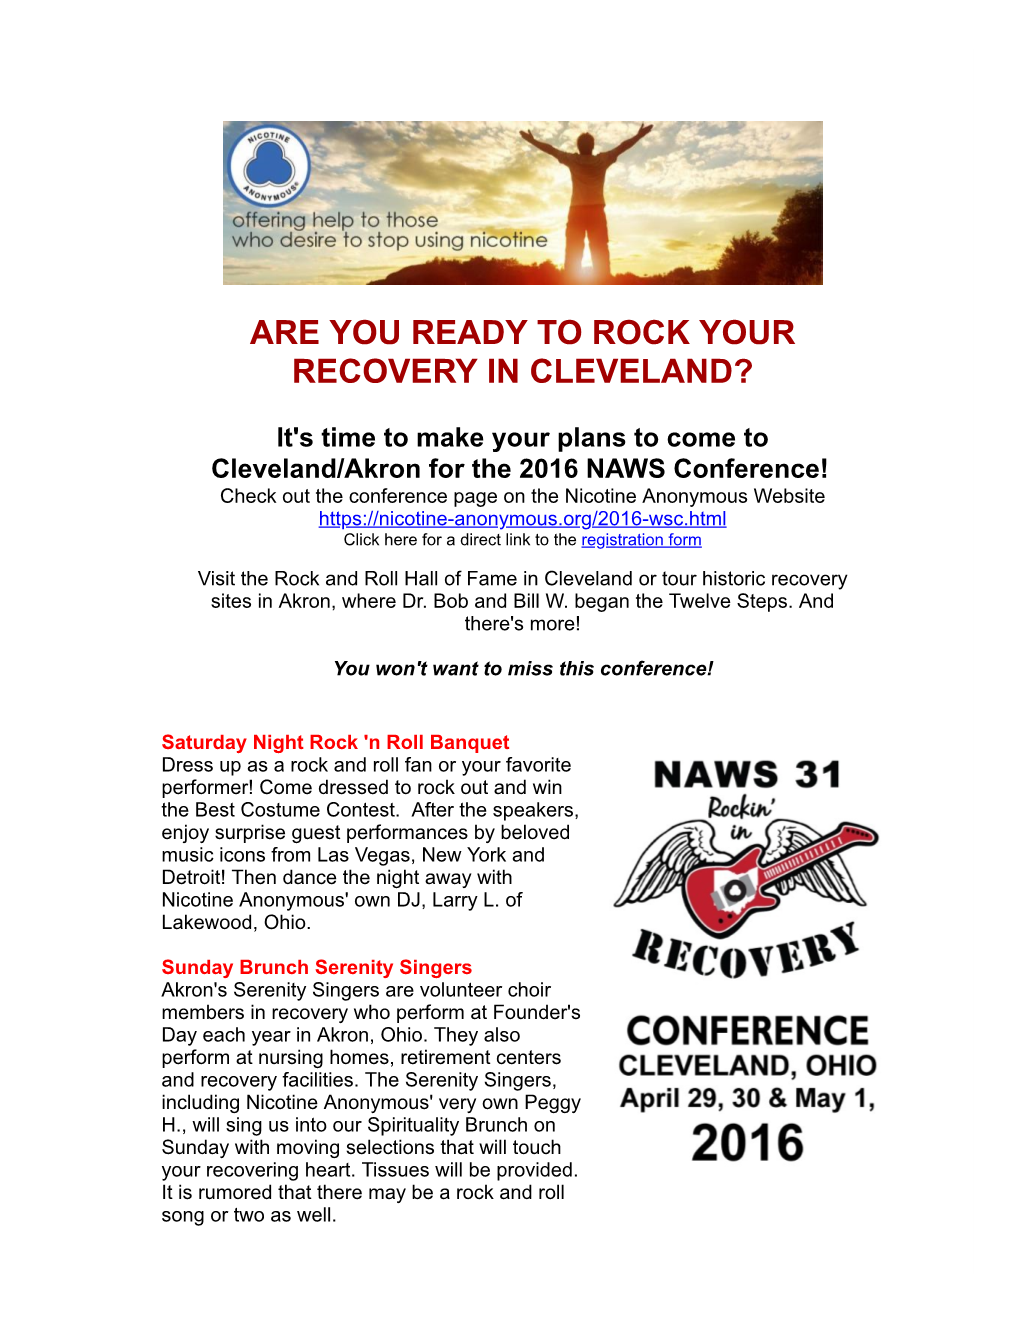 Are You Ready to Rock Your Recovery in Cleveland?